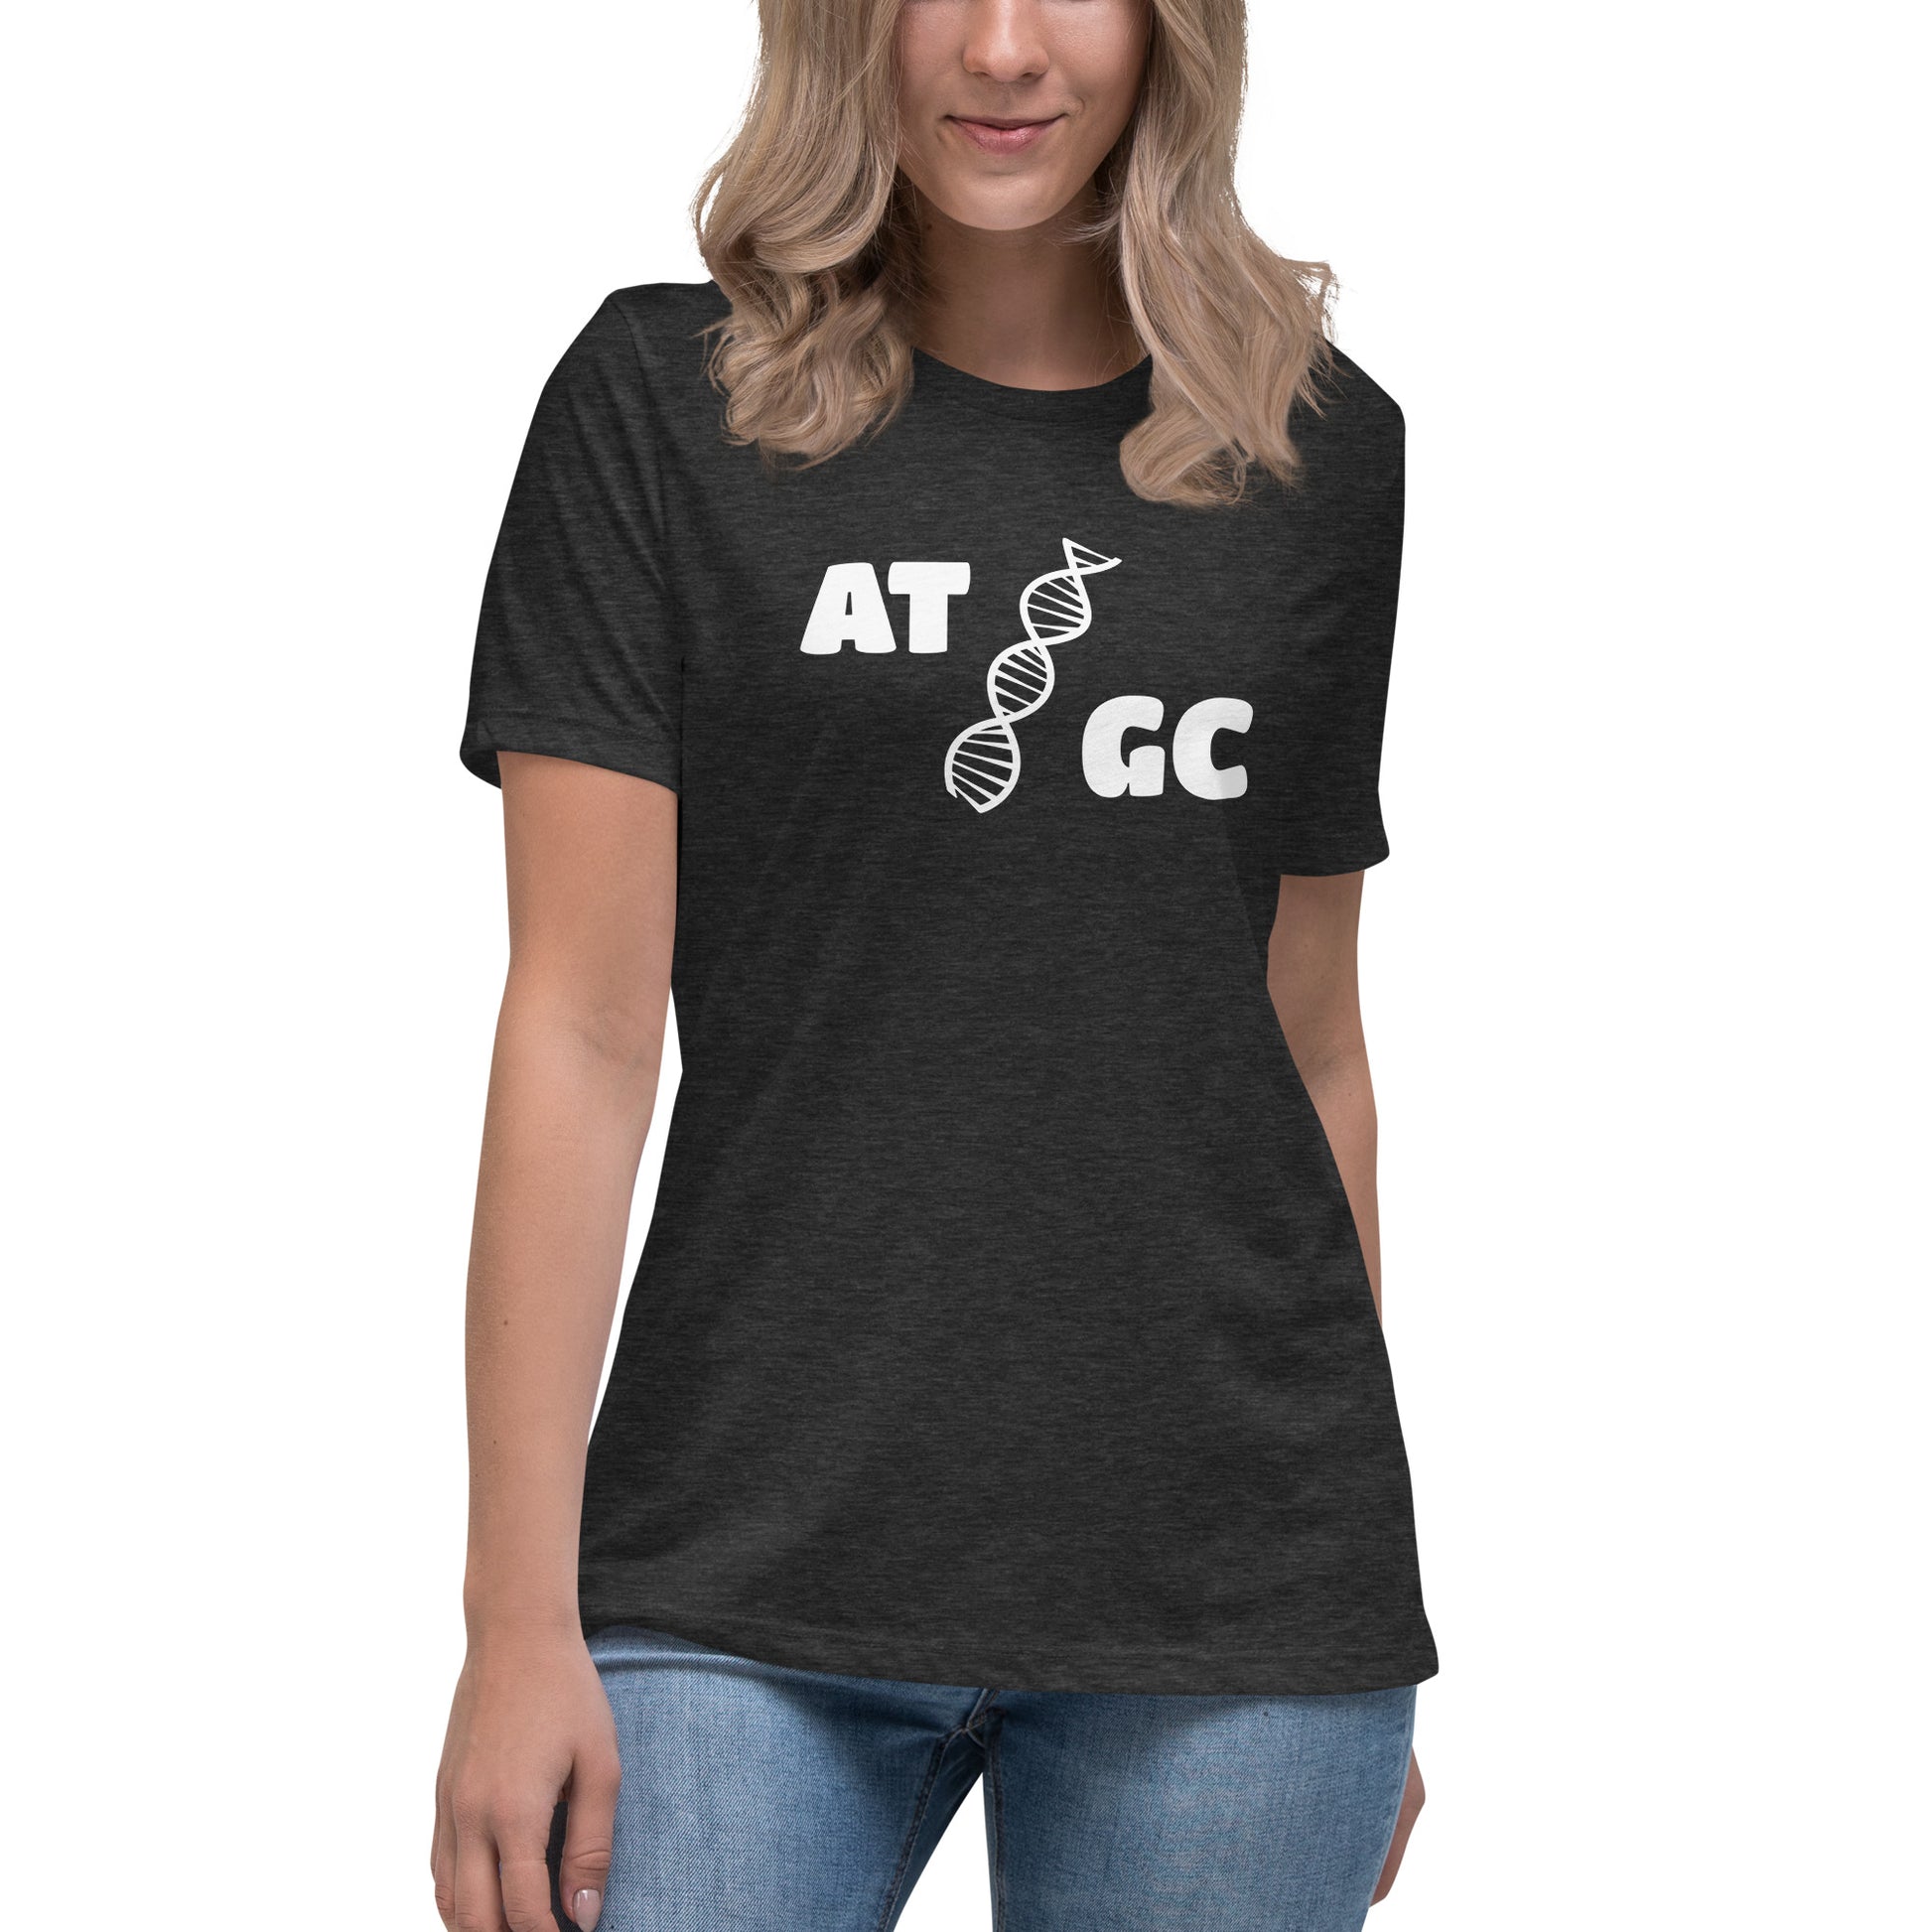 Women with dark grey t-shirt with image of a DNA string and the text "ATGC"